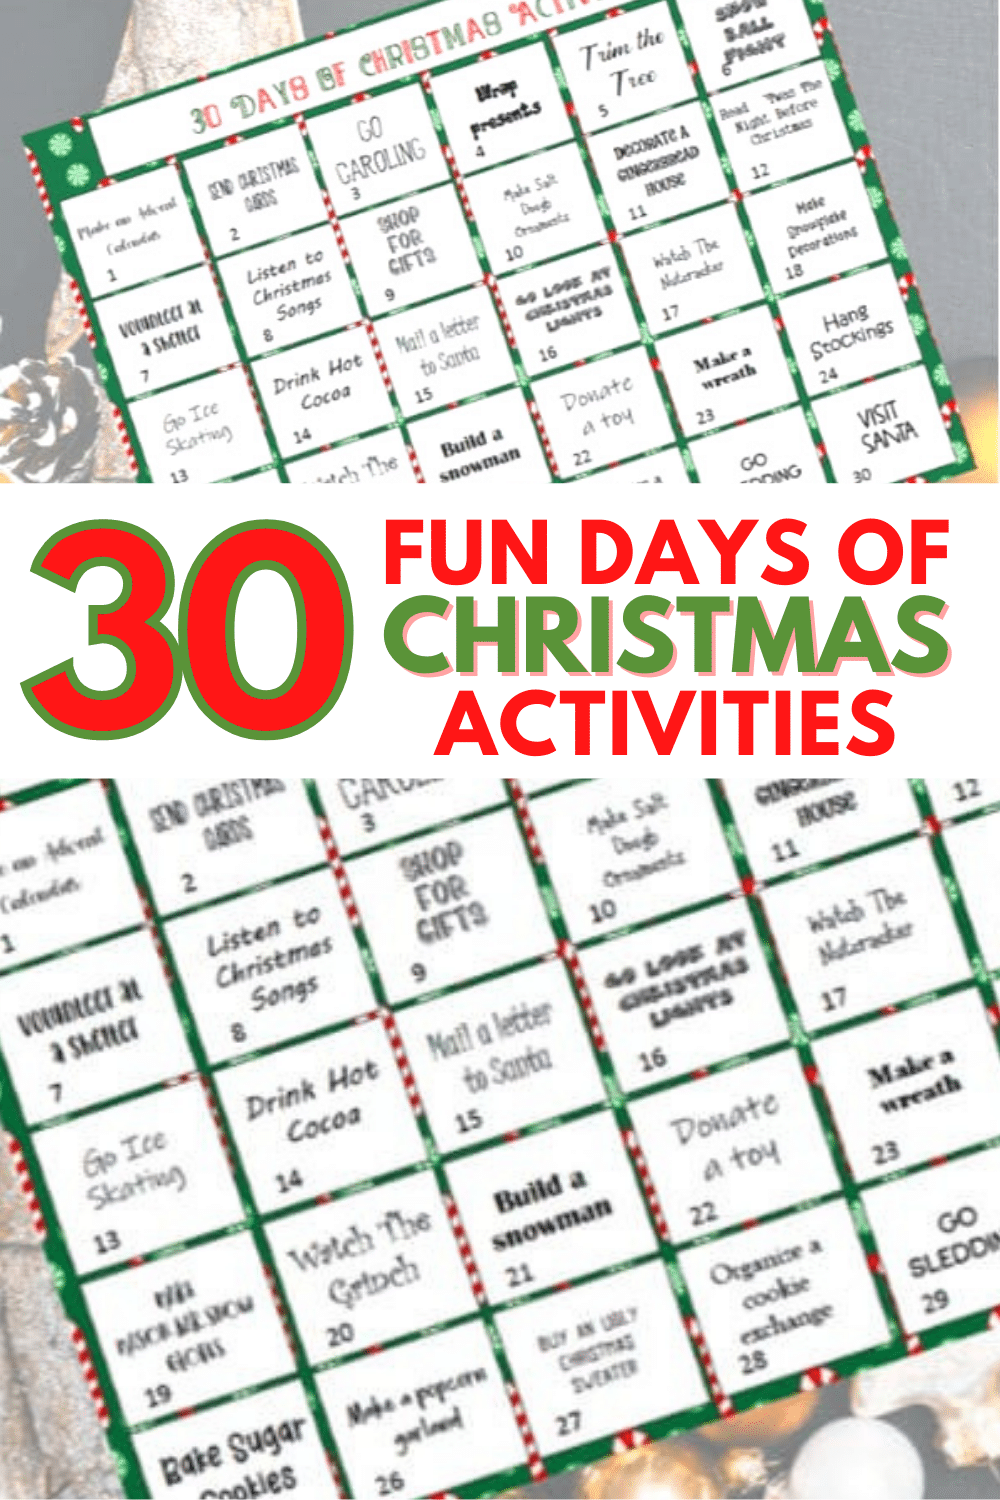 This 30 Days of Family Christmas Activities printable will help keep you on track to have the best holiday season making memories with your family. #printables #christmas #familyactivities via @wondermomwannab